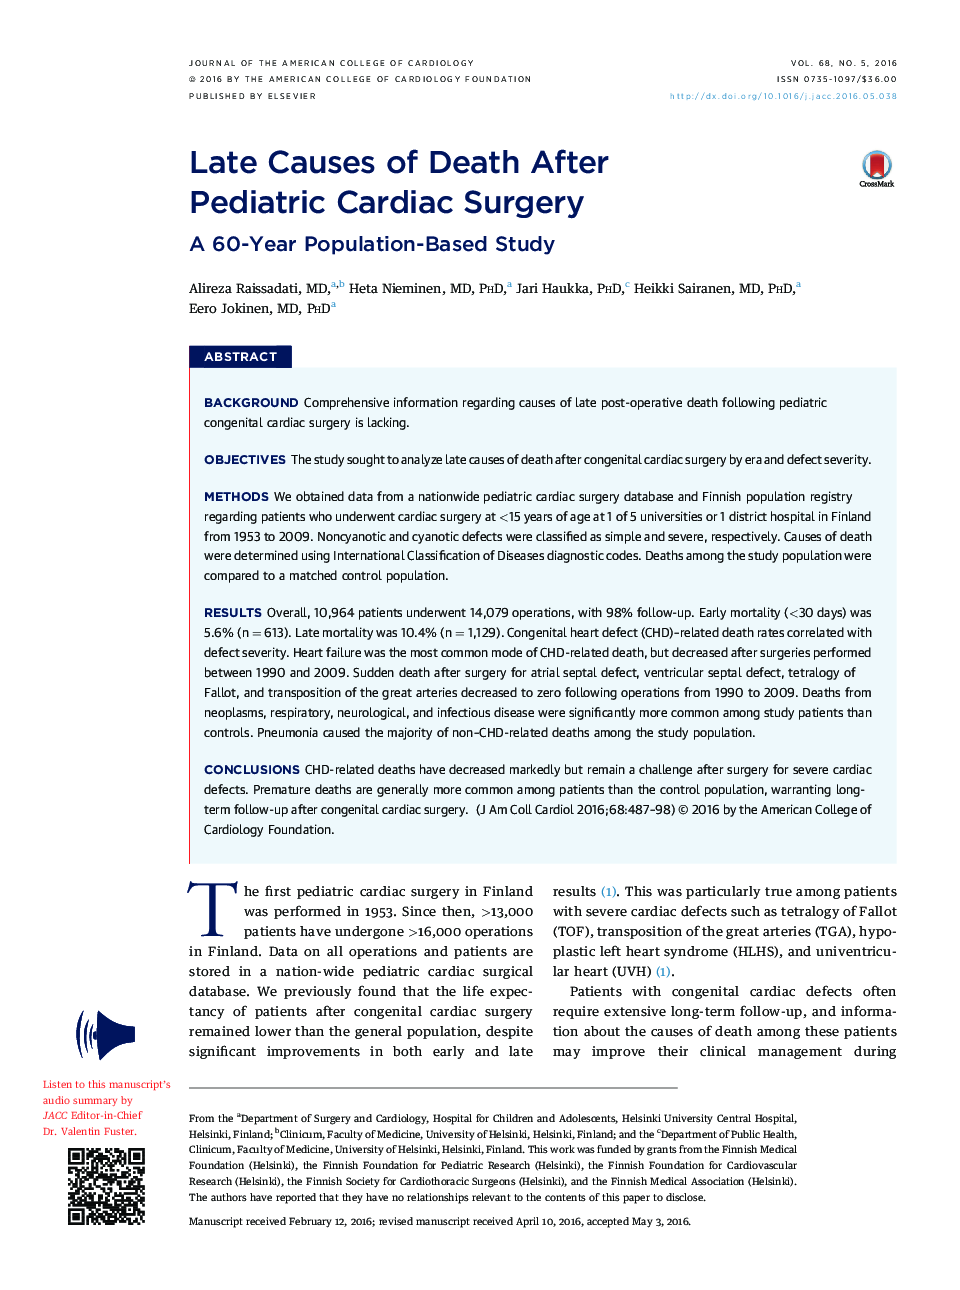 Late Causes of Death After PediatricÂ Cardiac Surgery: A 60-Year Population-Based Study